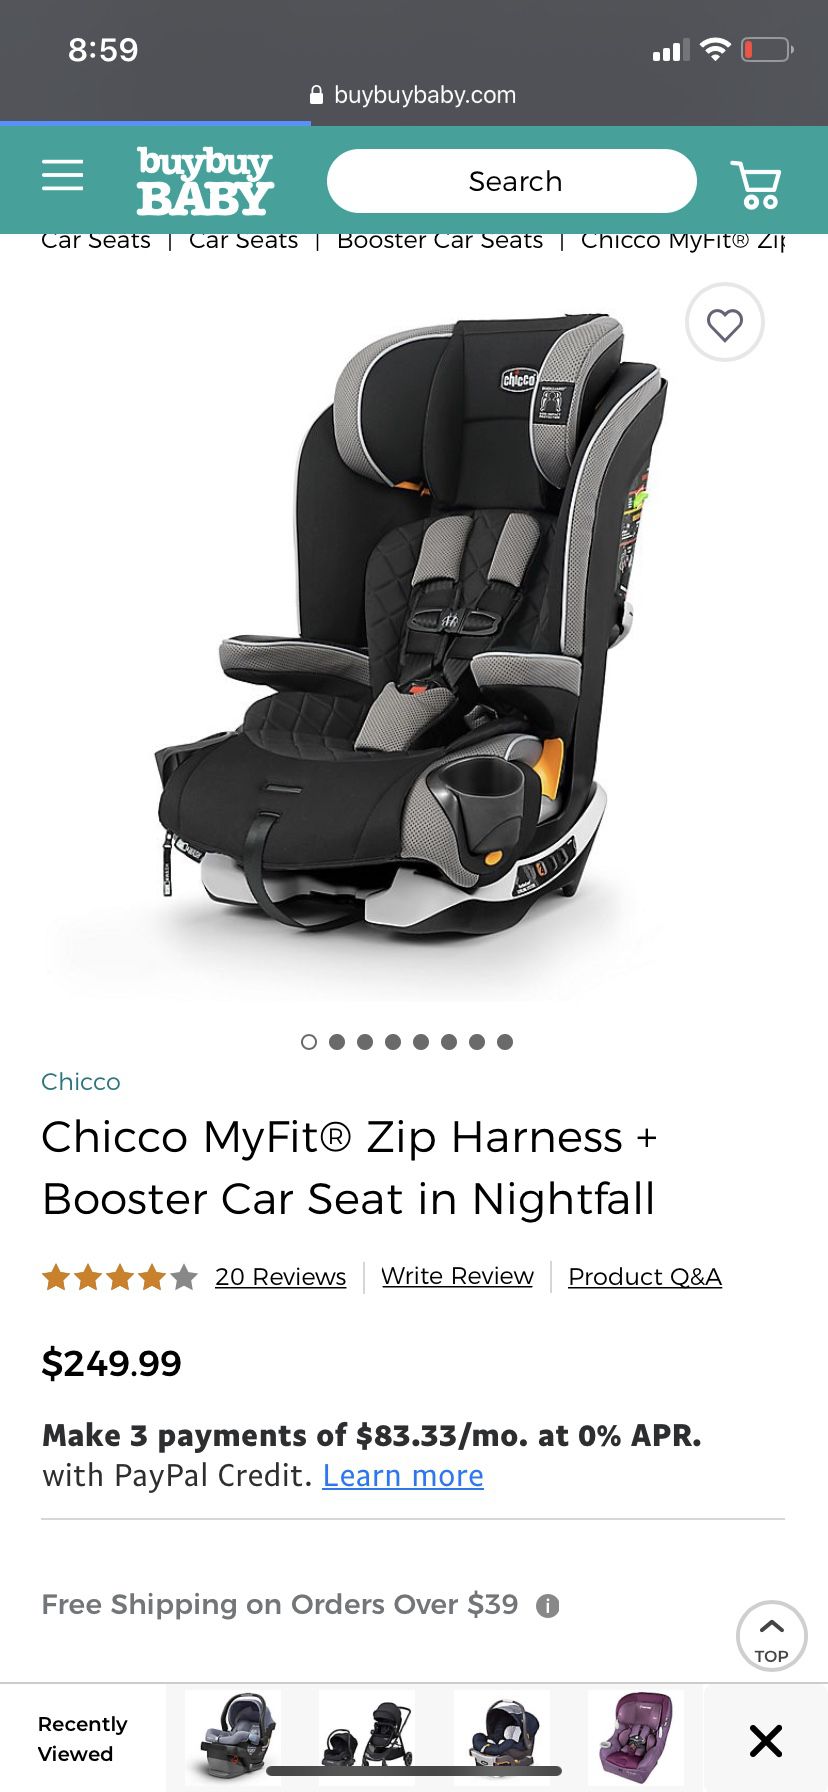 New Chicco MyFit Zip Harness + Booster Car Seat